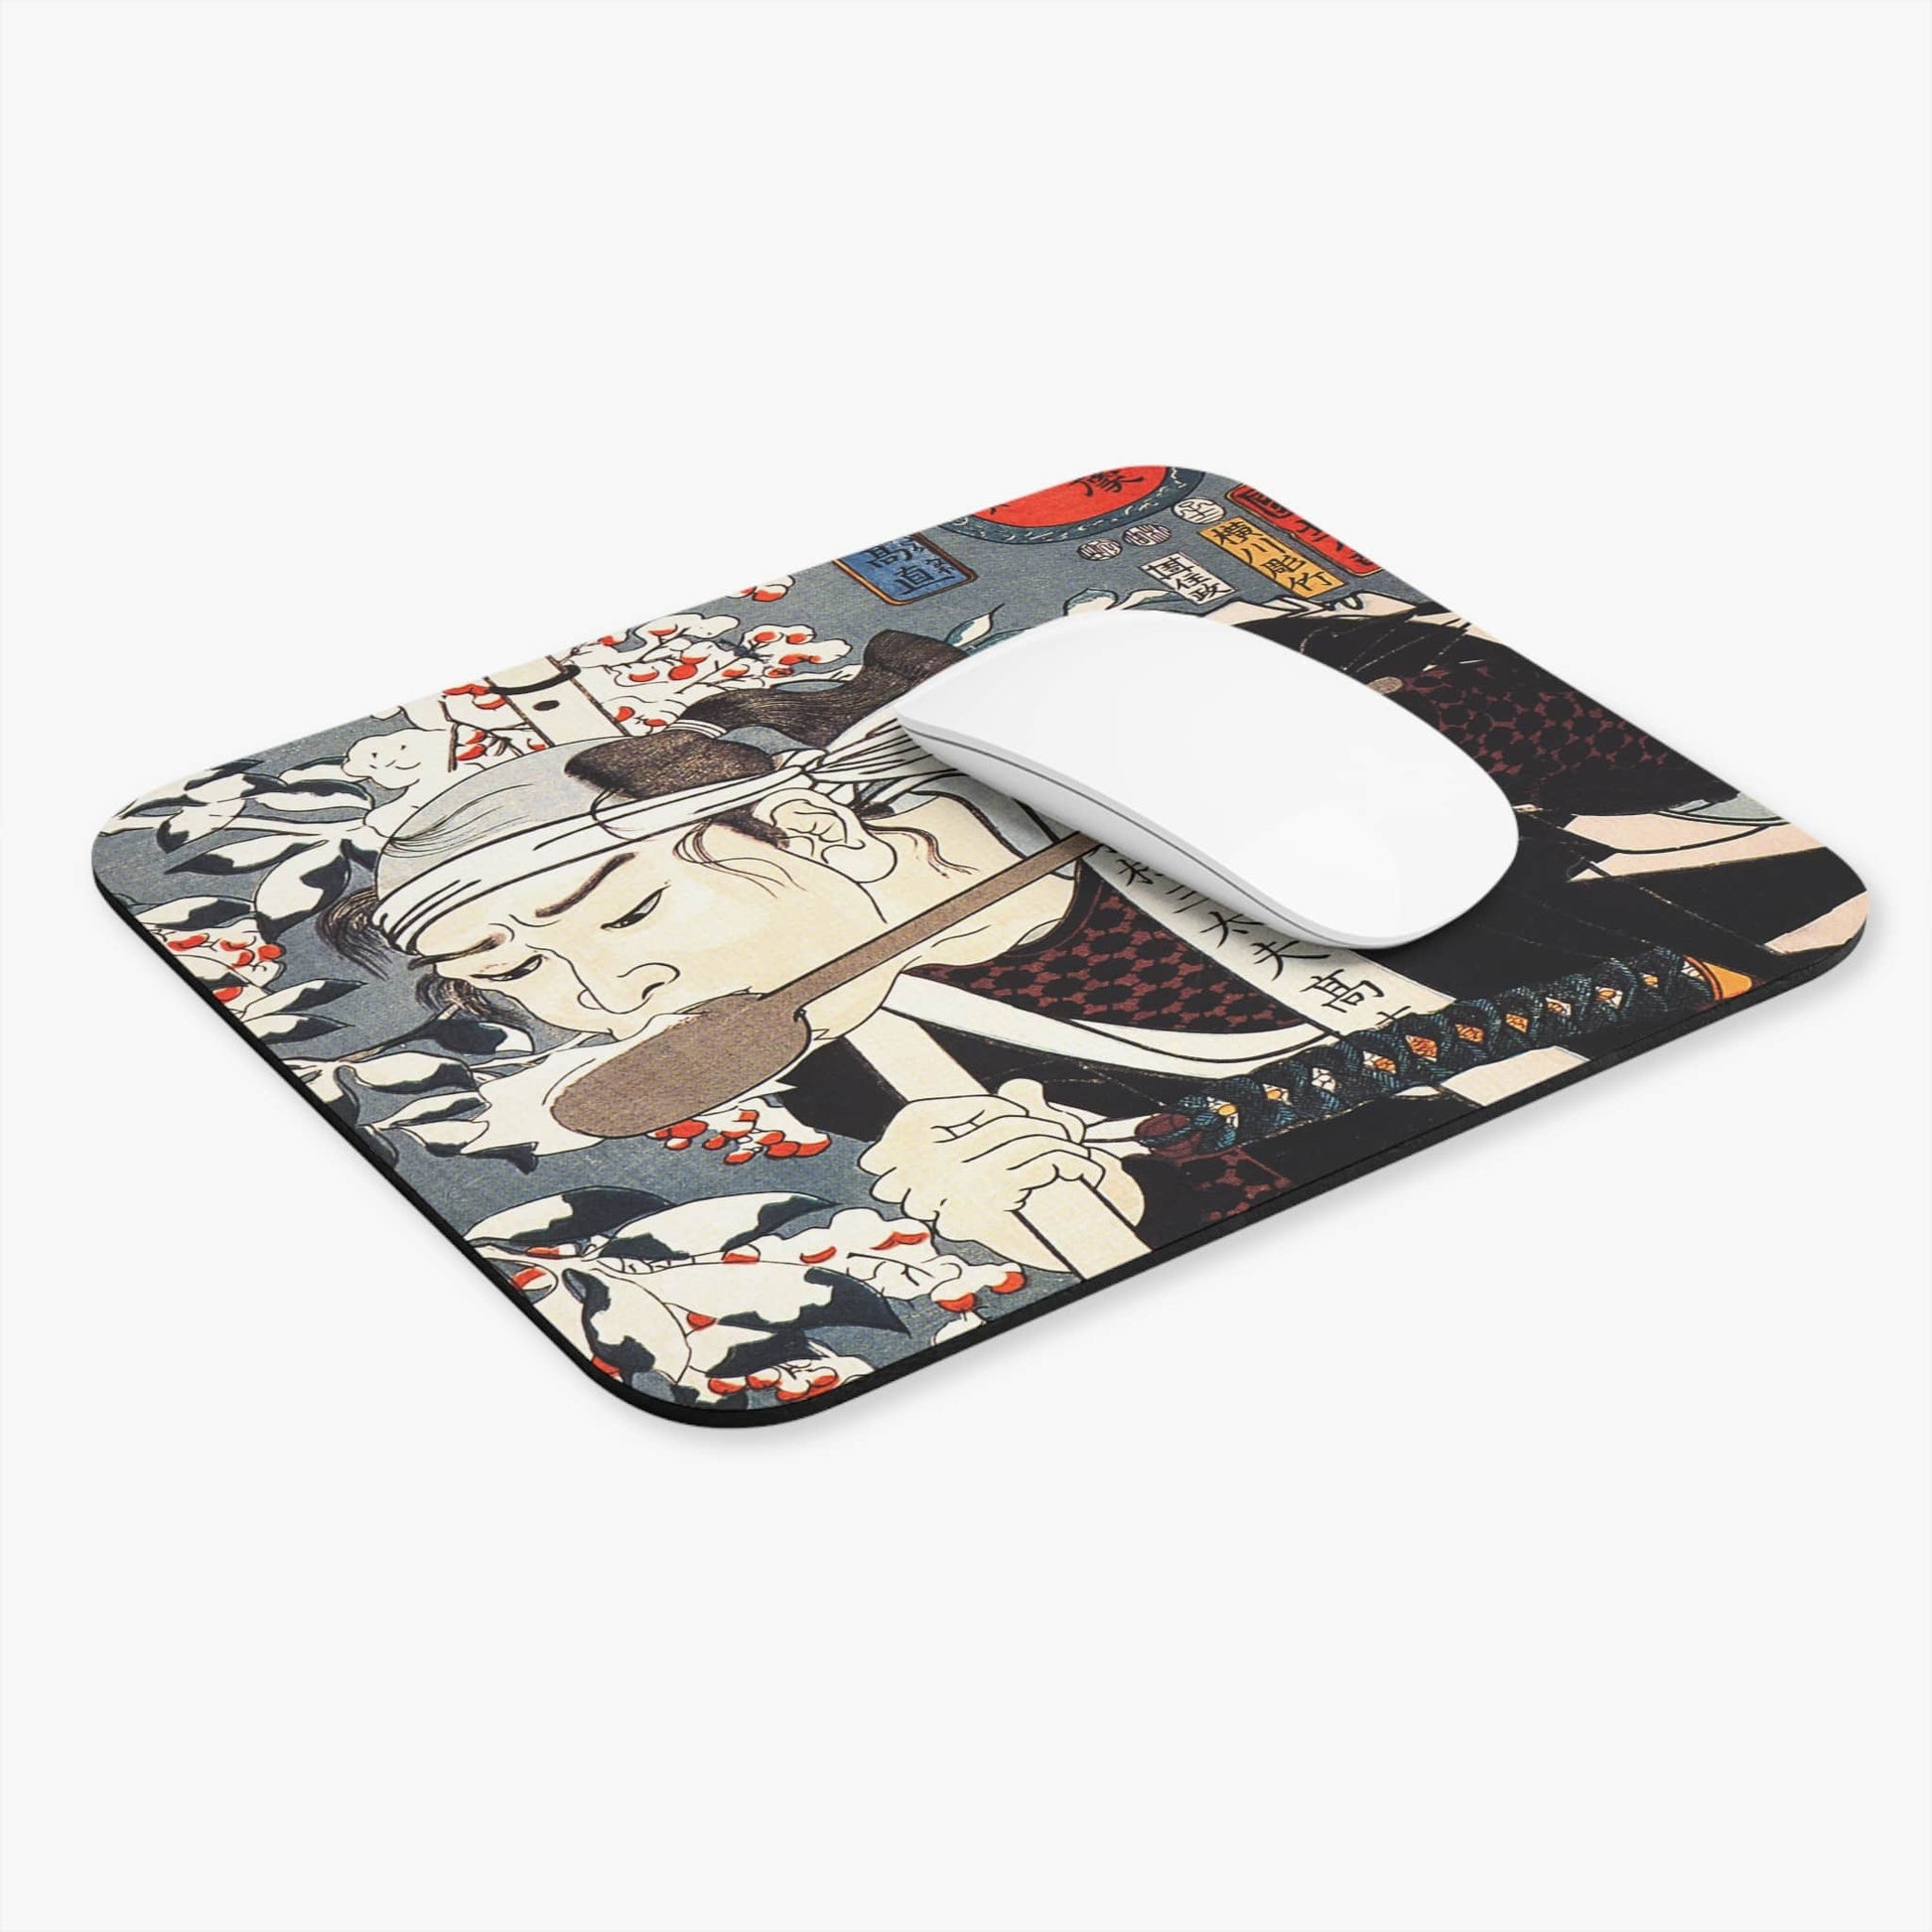 Japanese Warrior Computer Desk Mouse Pad With White Mouse